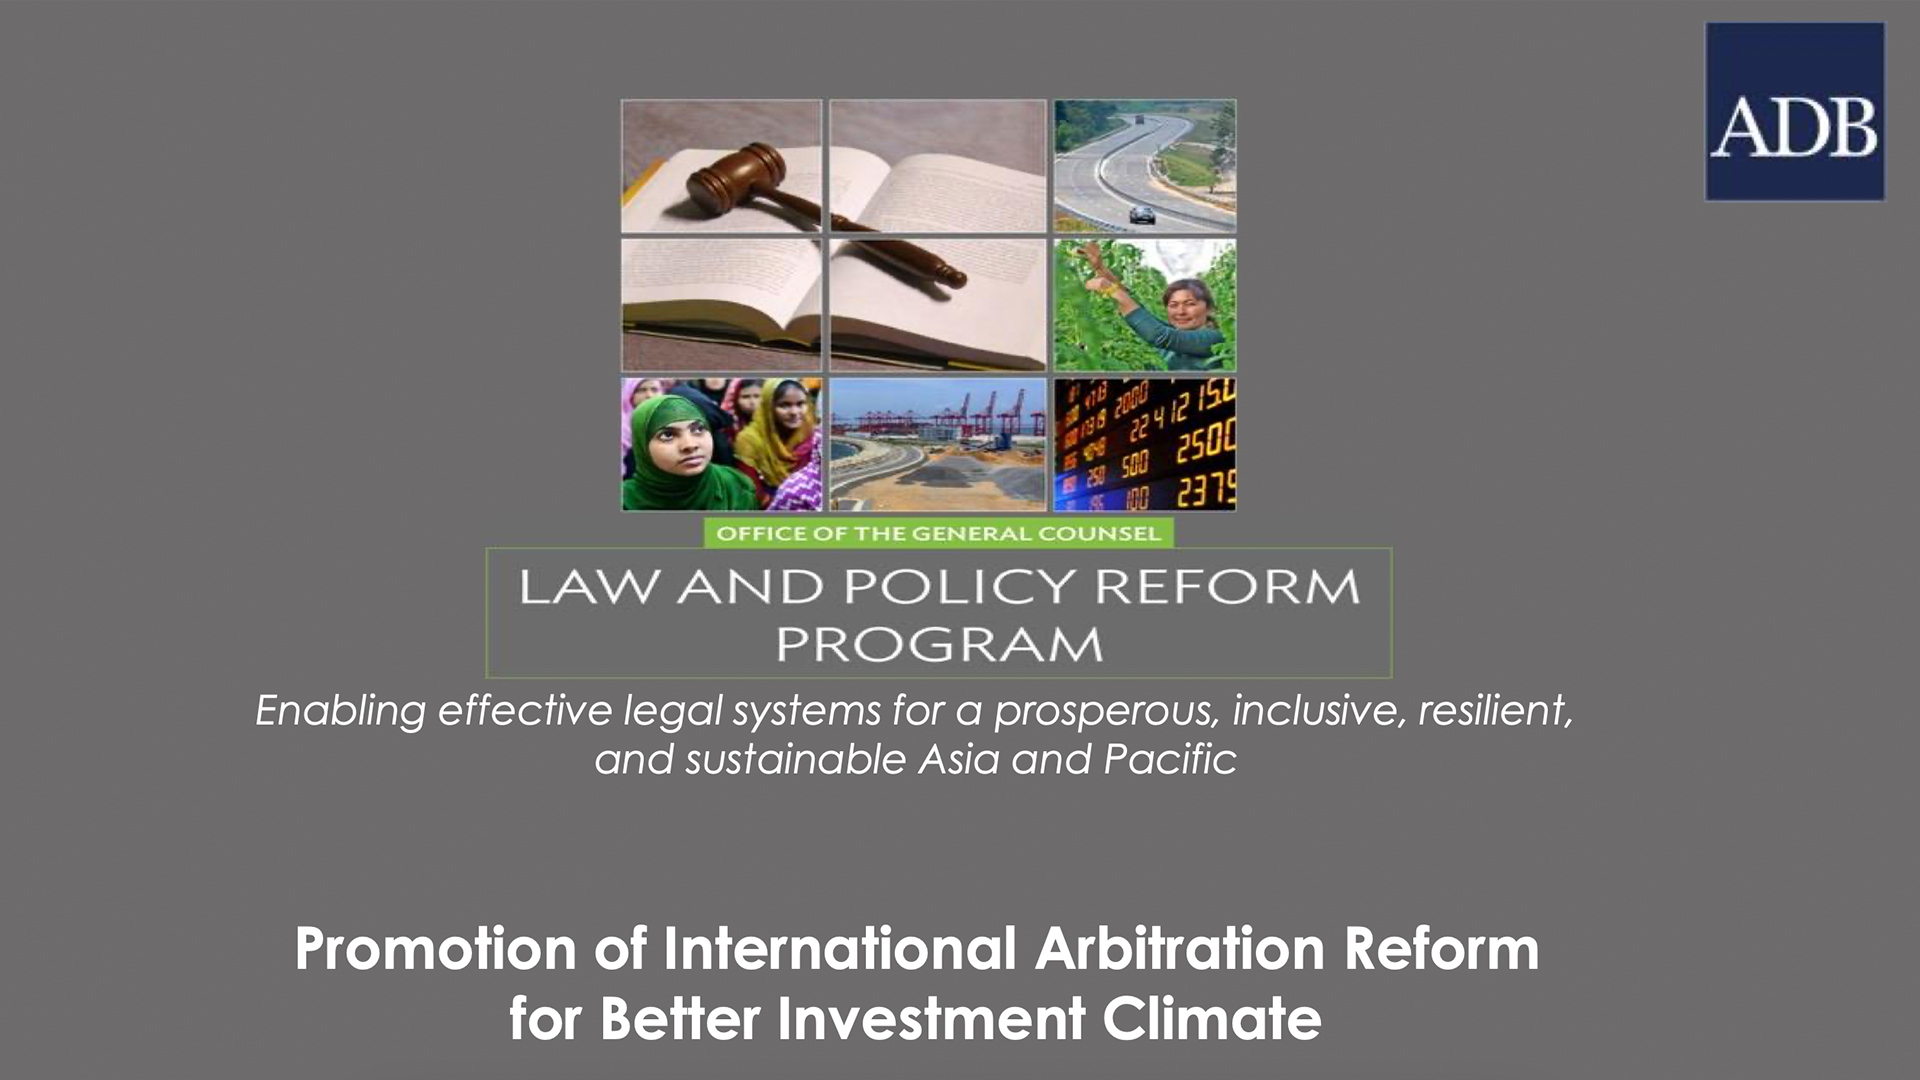 Promotion of International Arbitration Reform for Better Investment Climate